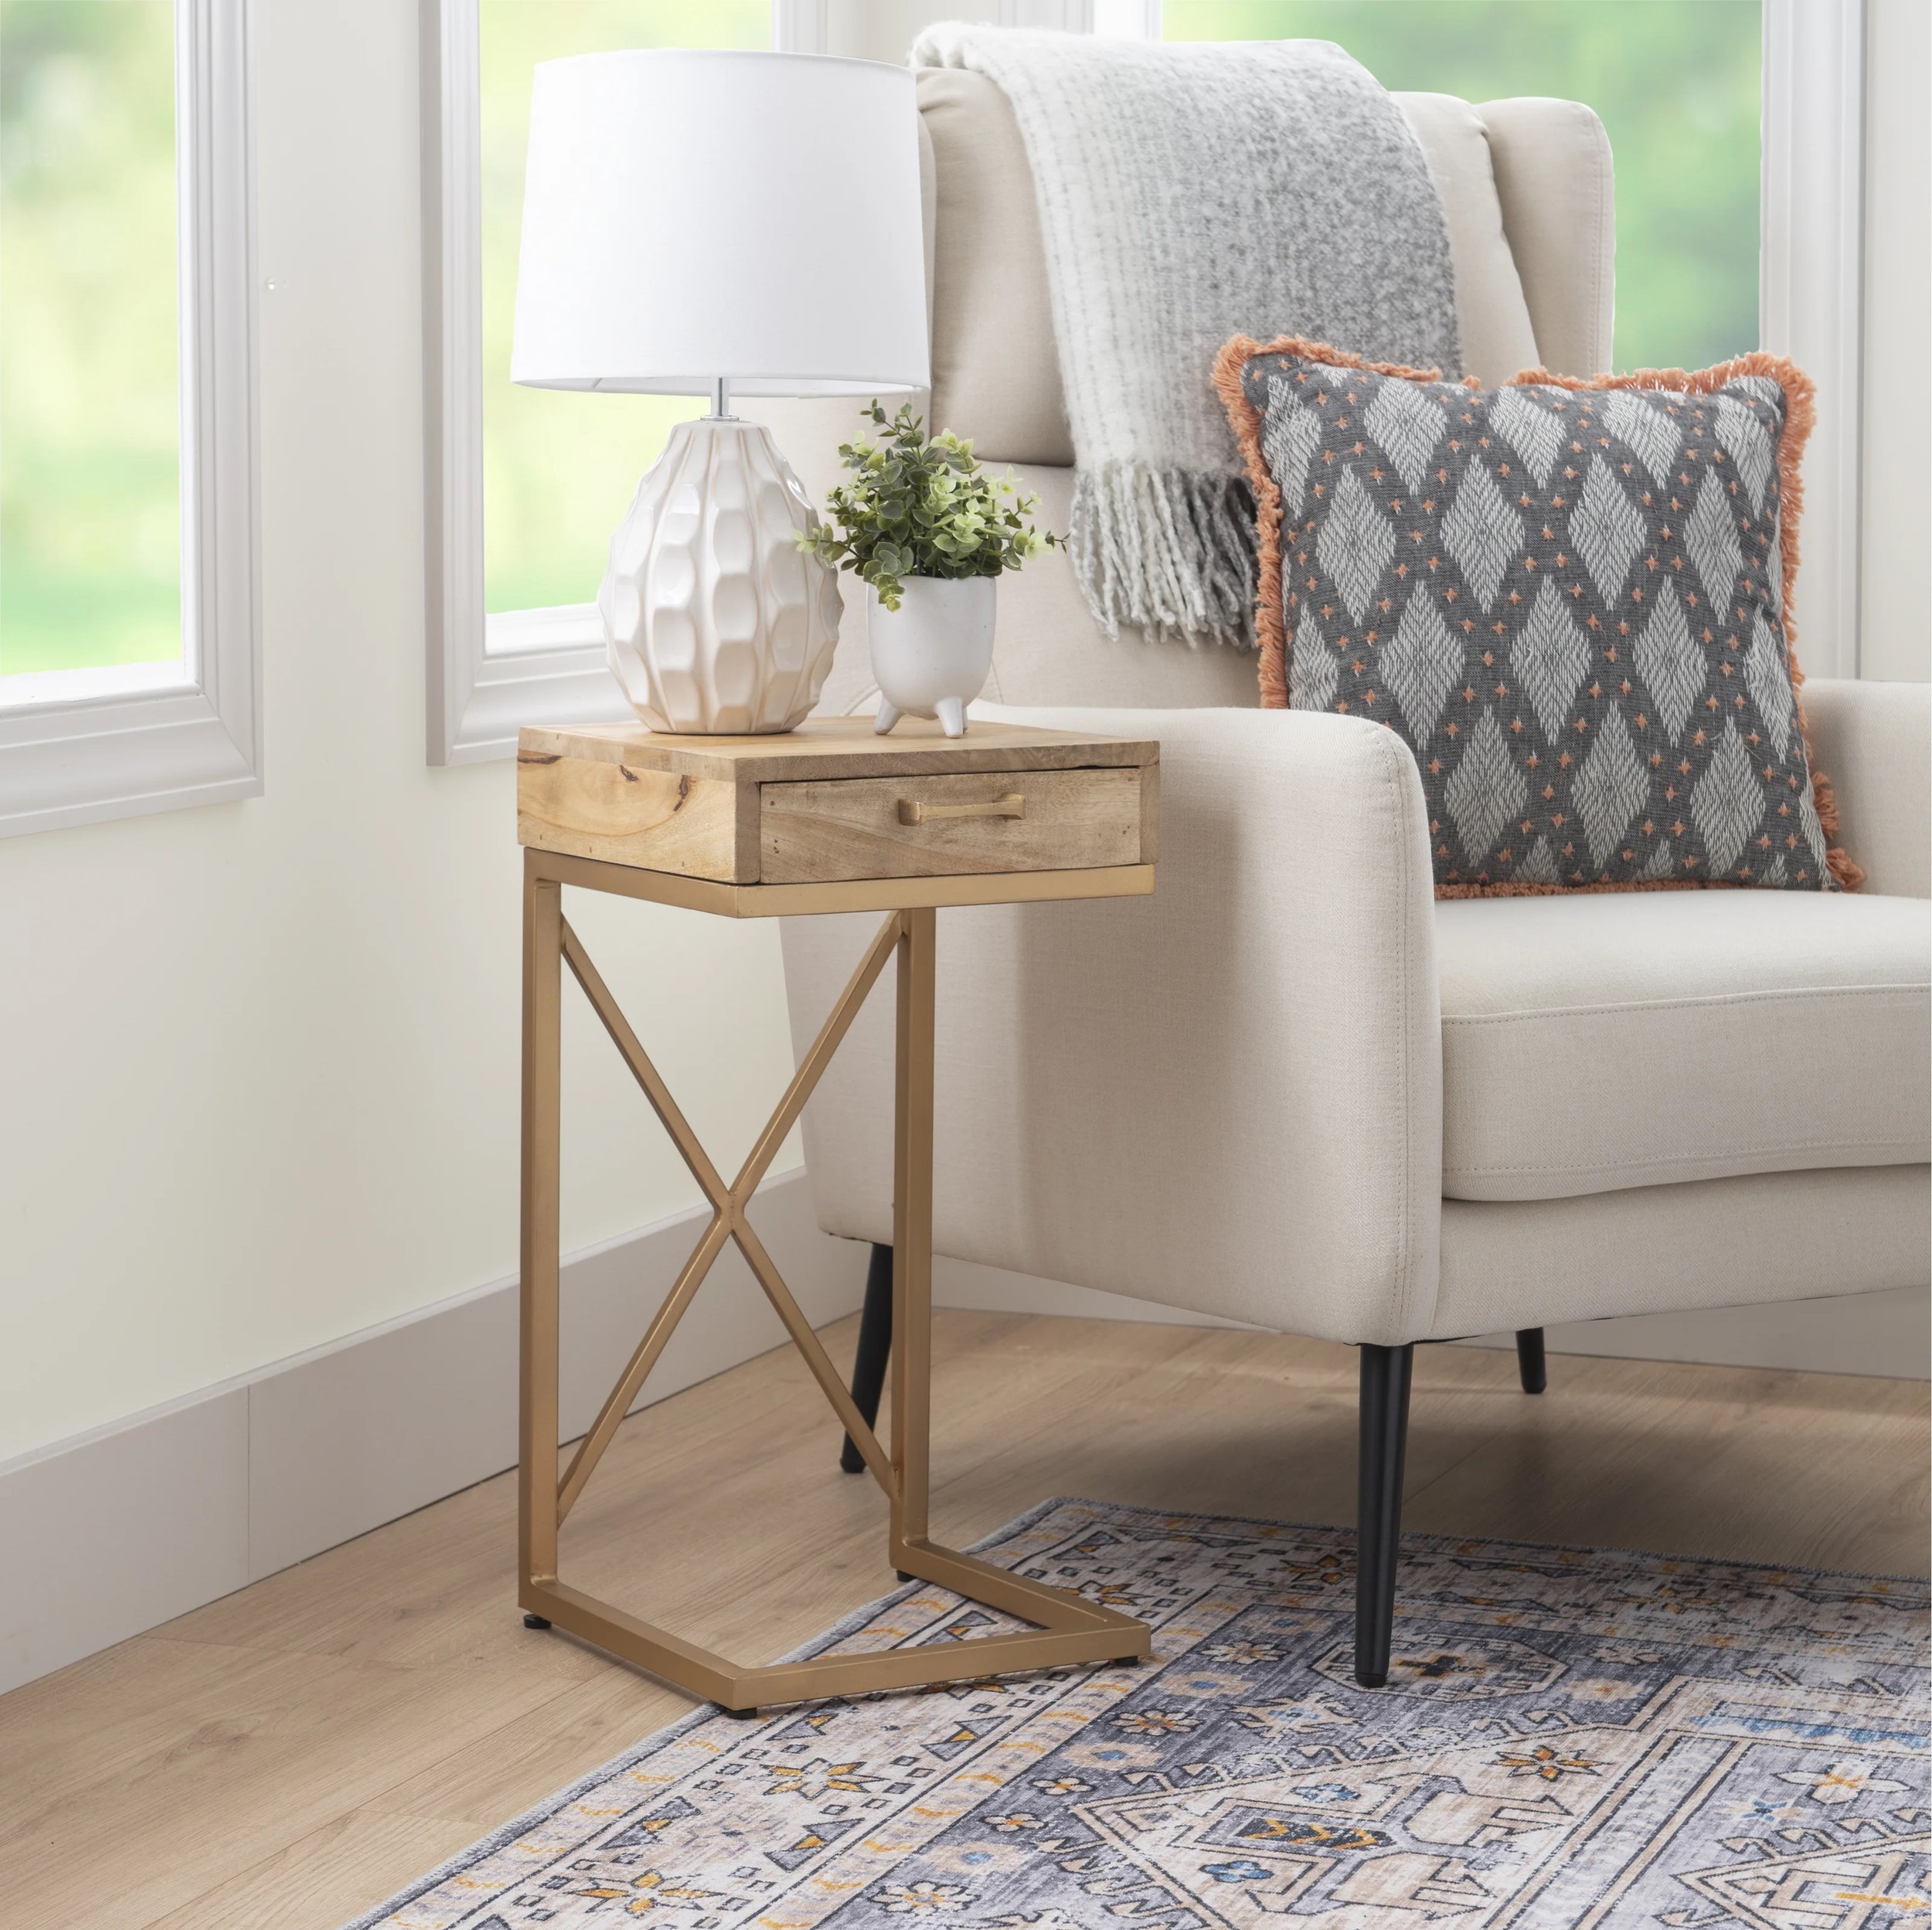 Wayfair - $81.99 - Holte Solid Wood C Table End Table with Storage